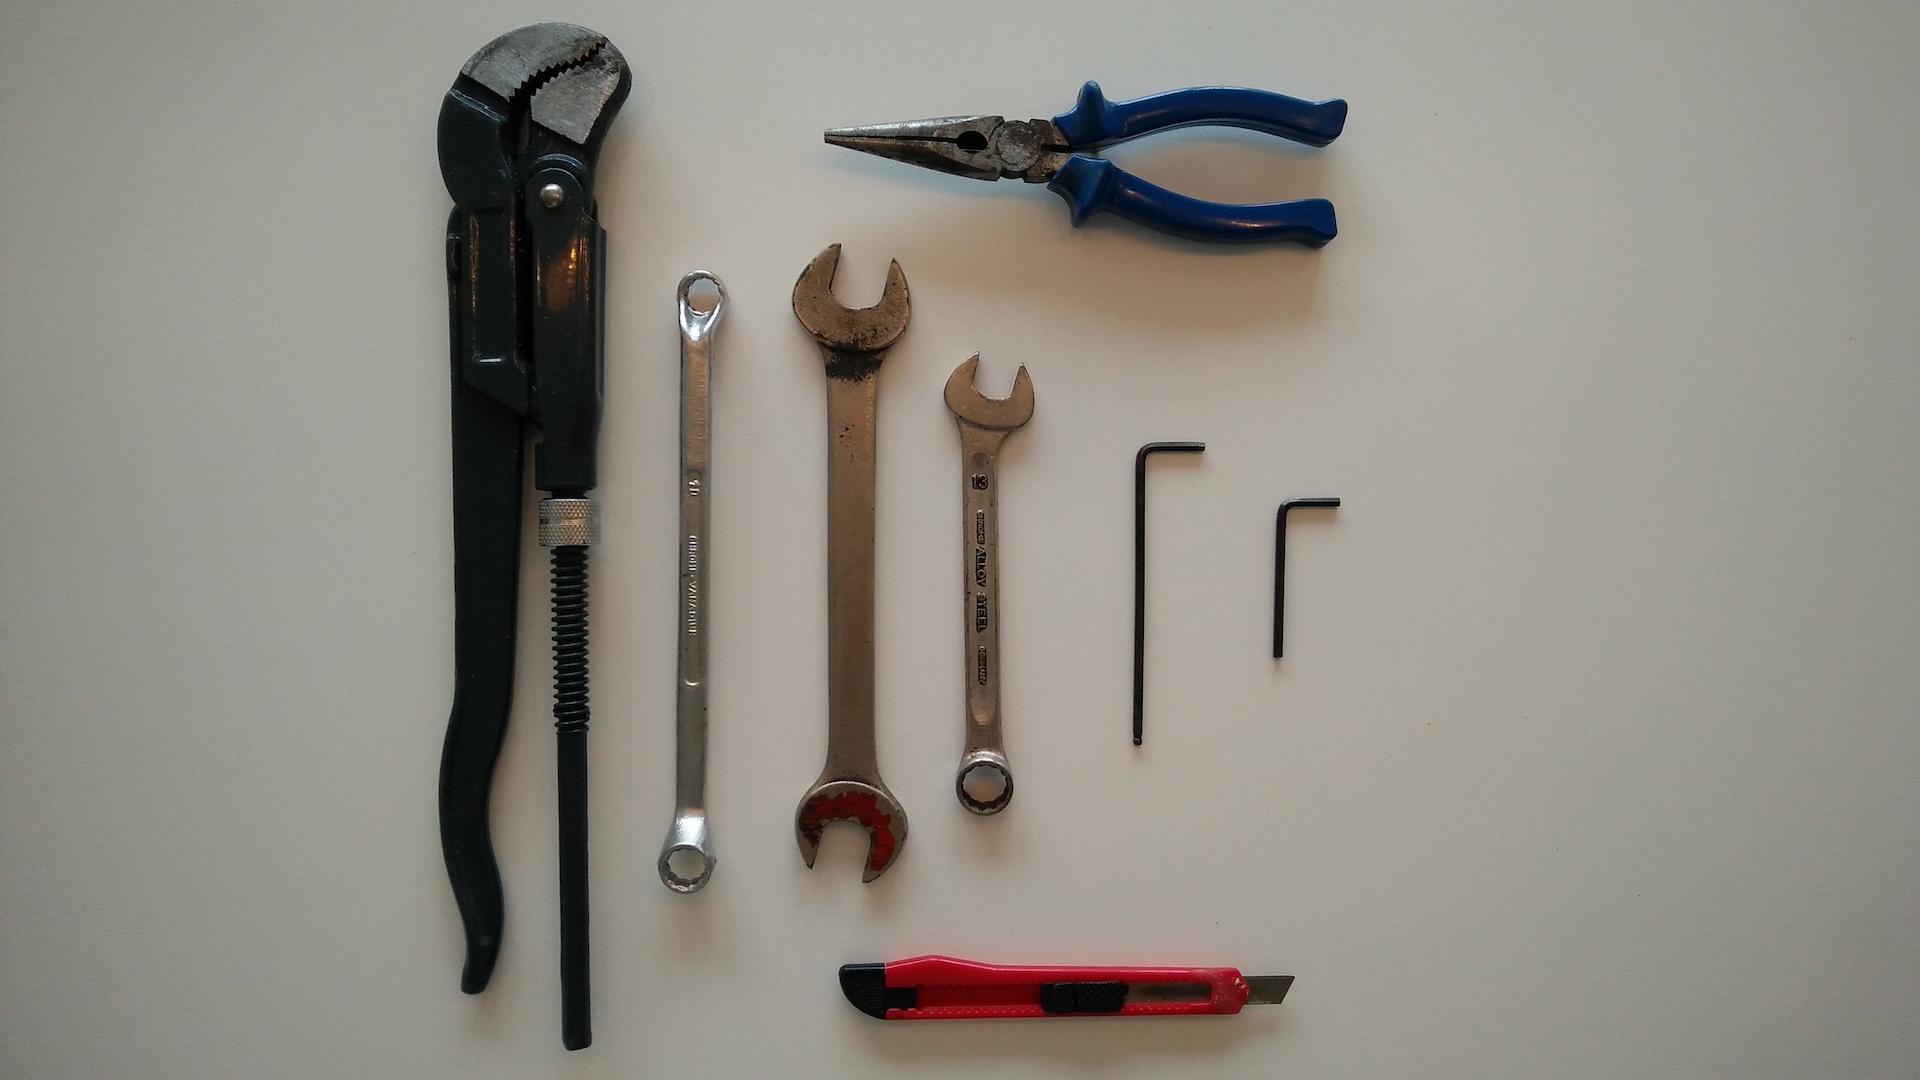 Tools used during the repair